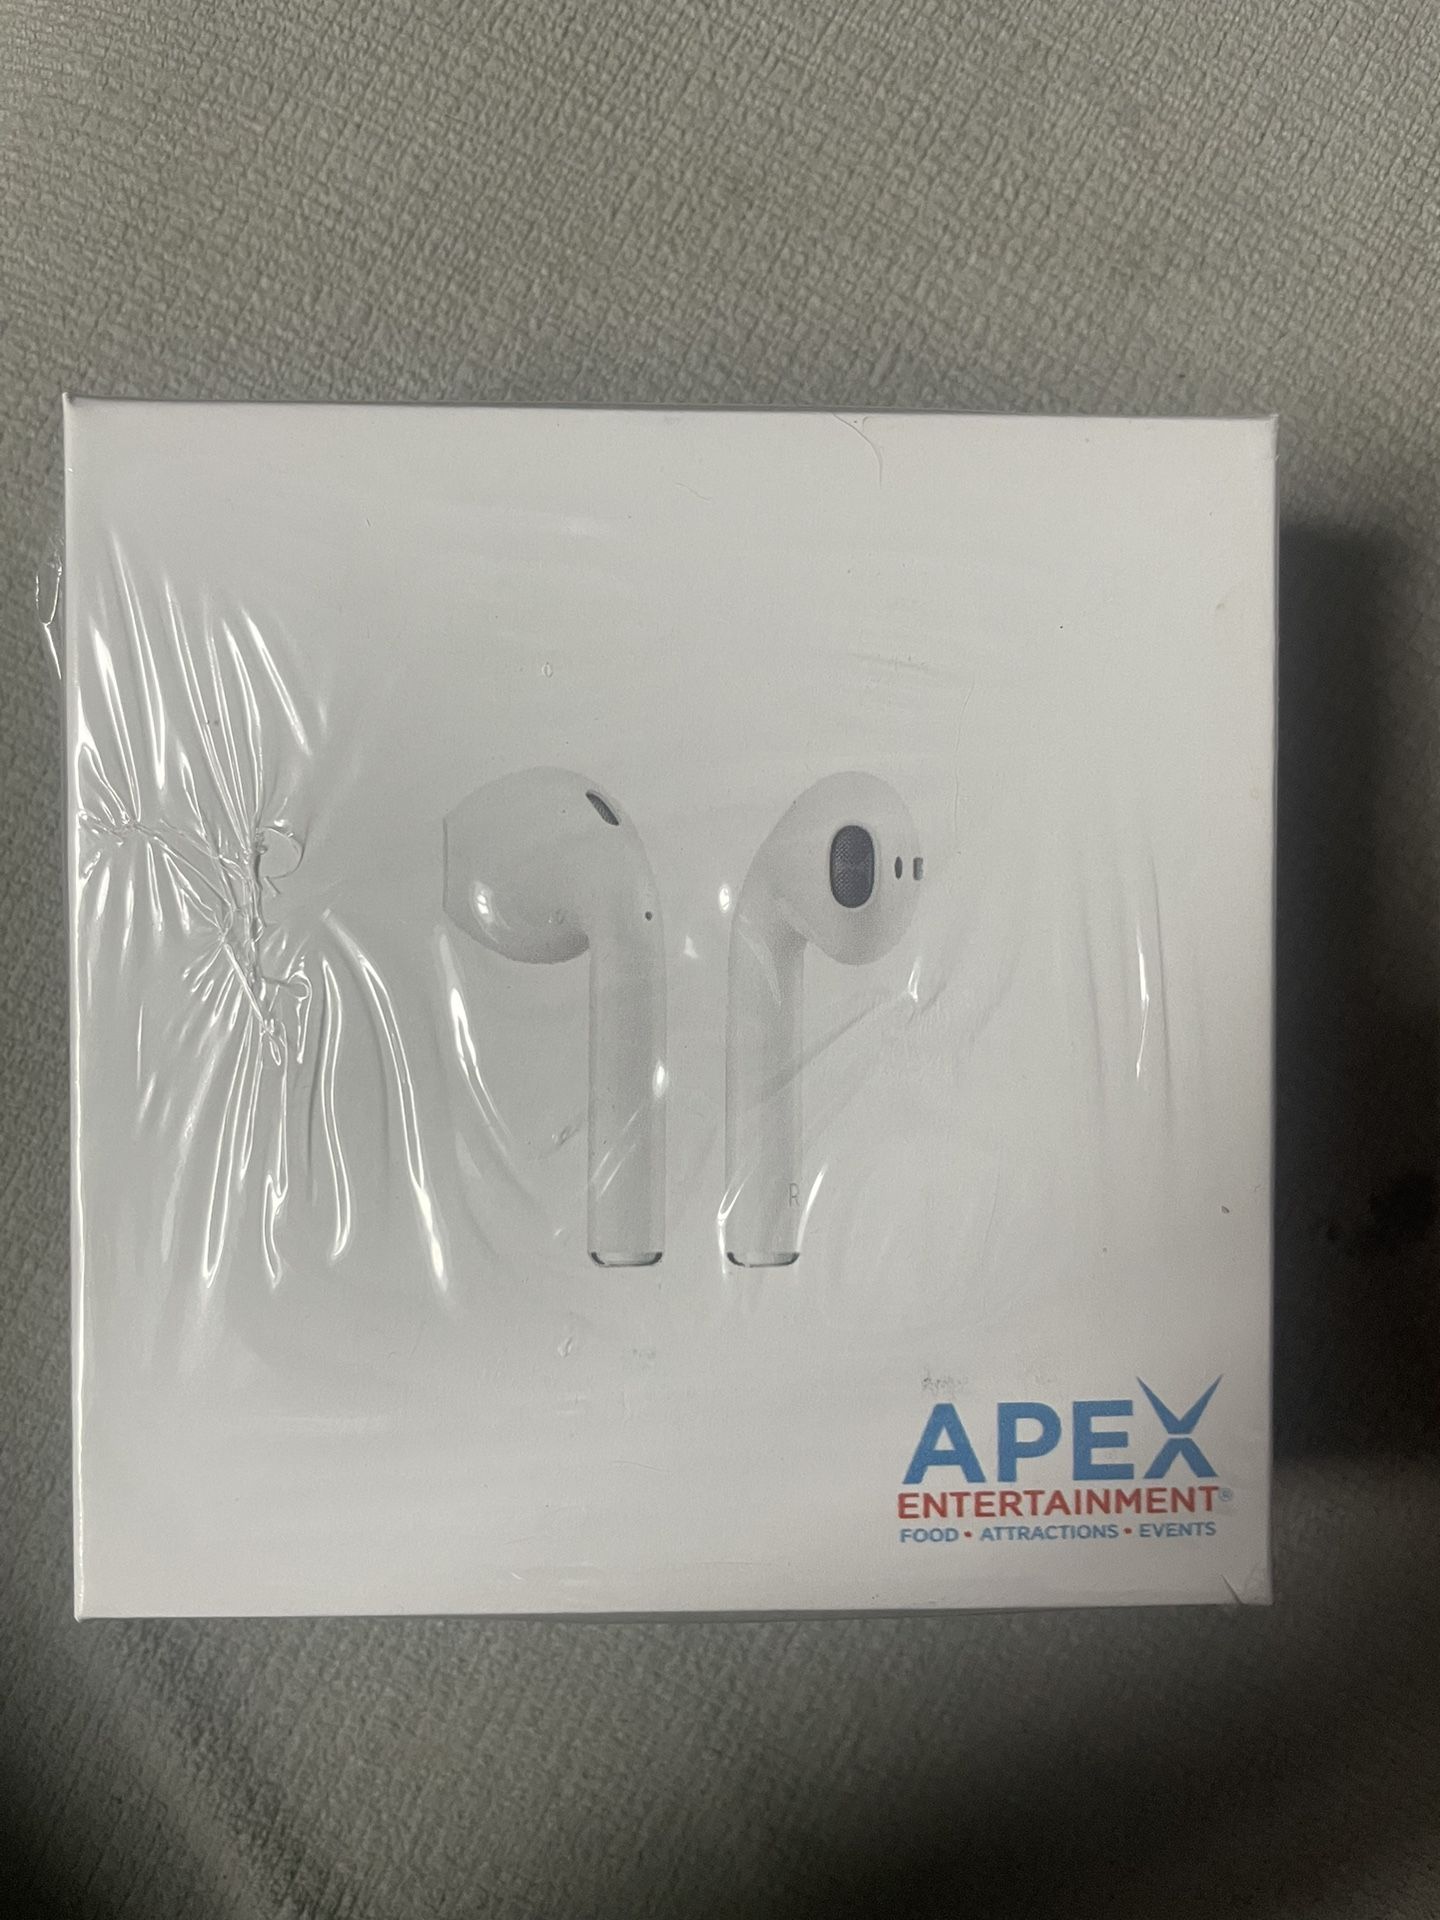 Wireless Earbuds With Charging Case